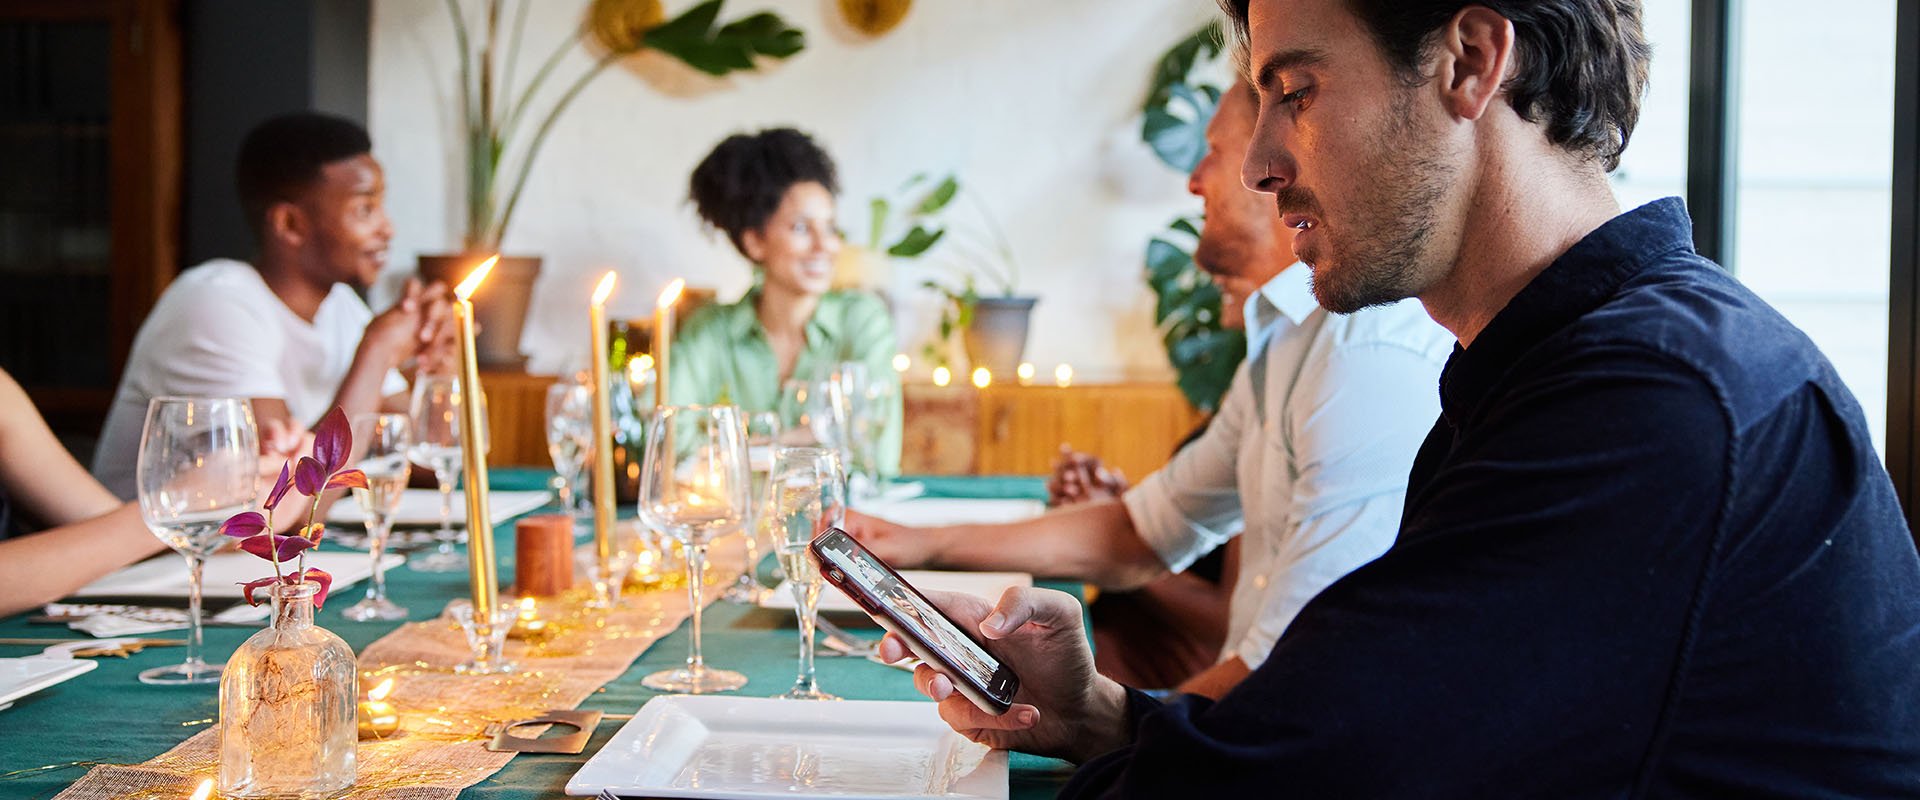 Mid-aged people sitting around a table having a dinner party together. In focus is a man distracted by his smartphone where he looks at social media with a picture of a woman.